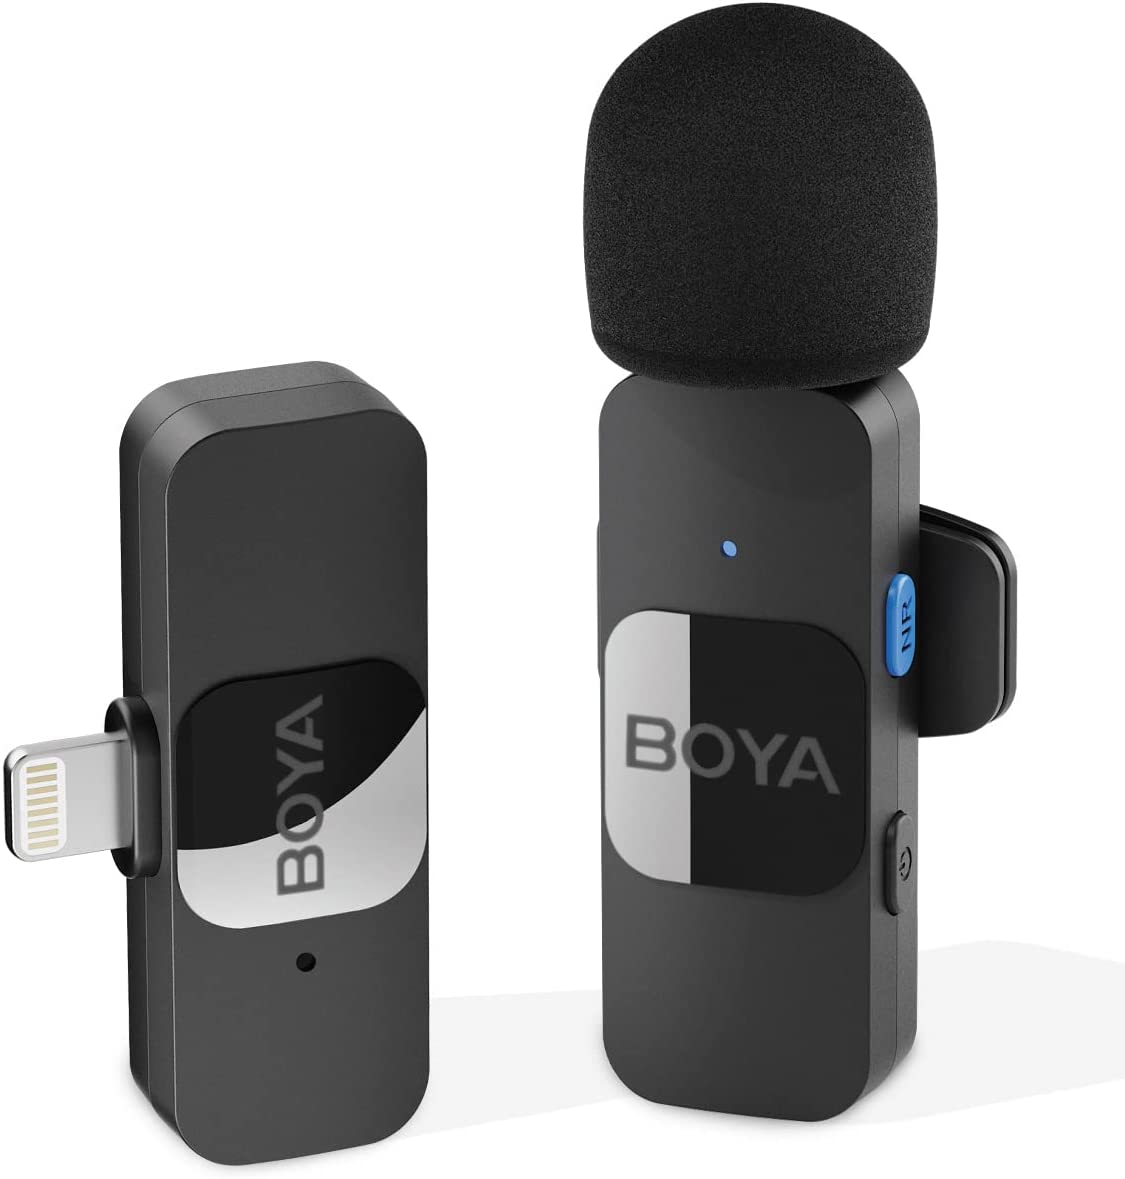 BOYA by-V1 Wireless Lavalier Microphone for iPhone,2.4GHz Plug Play Mnini Clip-On Mic with Noise Cancelling for Vlogging Video Podcast Interview YouTube Recording